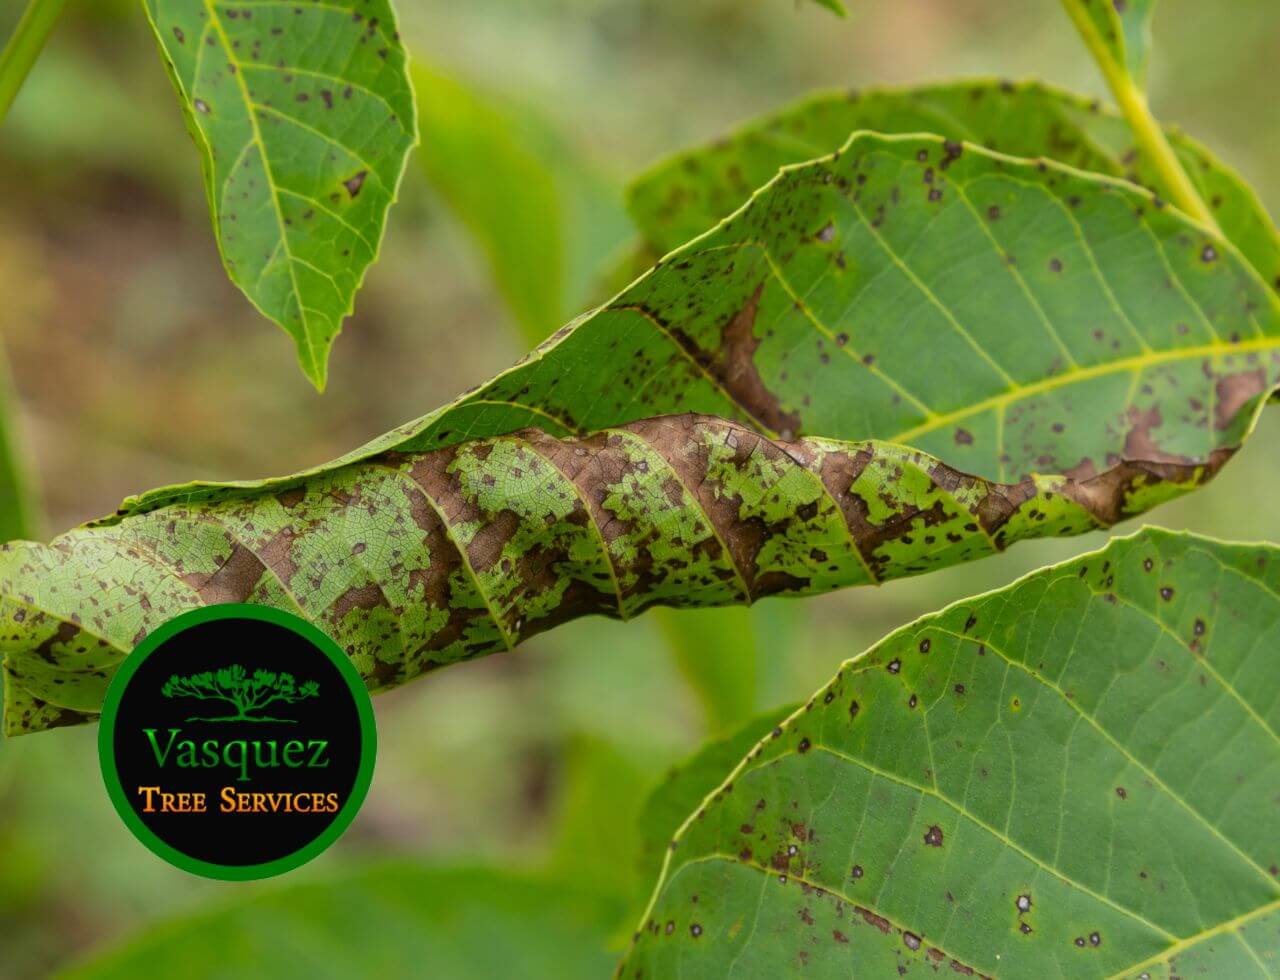 A variety of trees are impacted by anthracnose, which causes premature leaf loss,